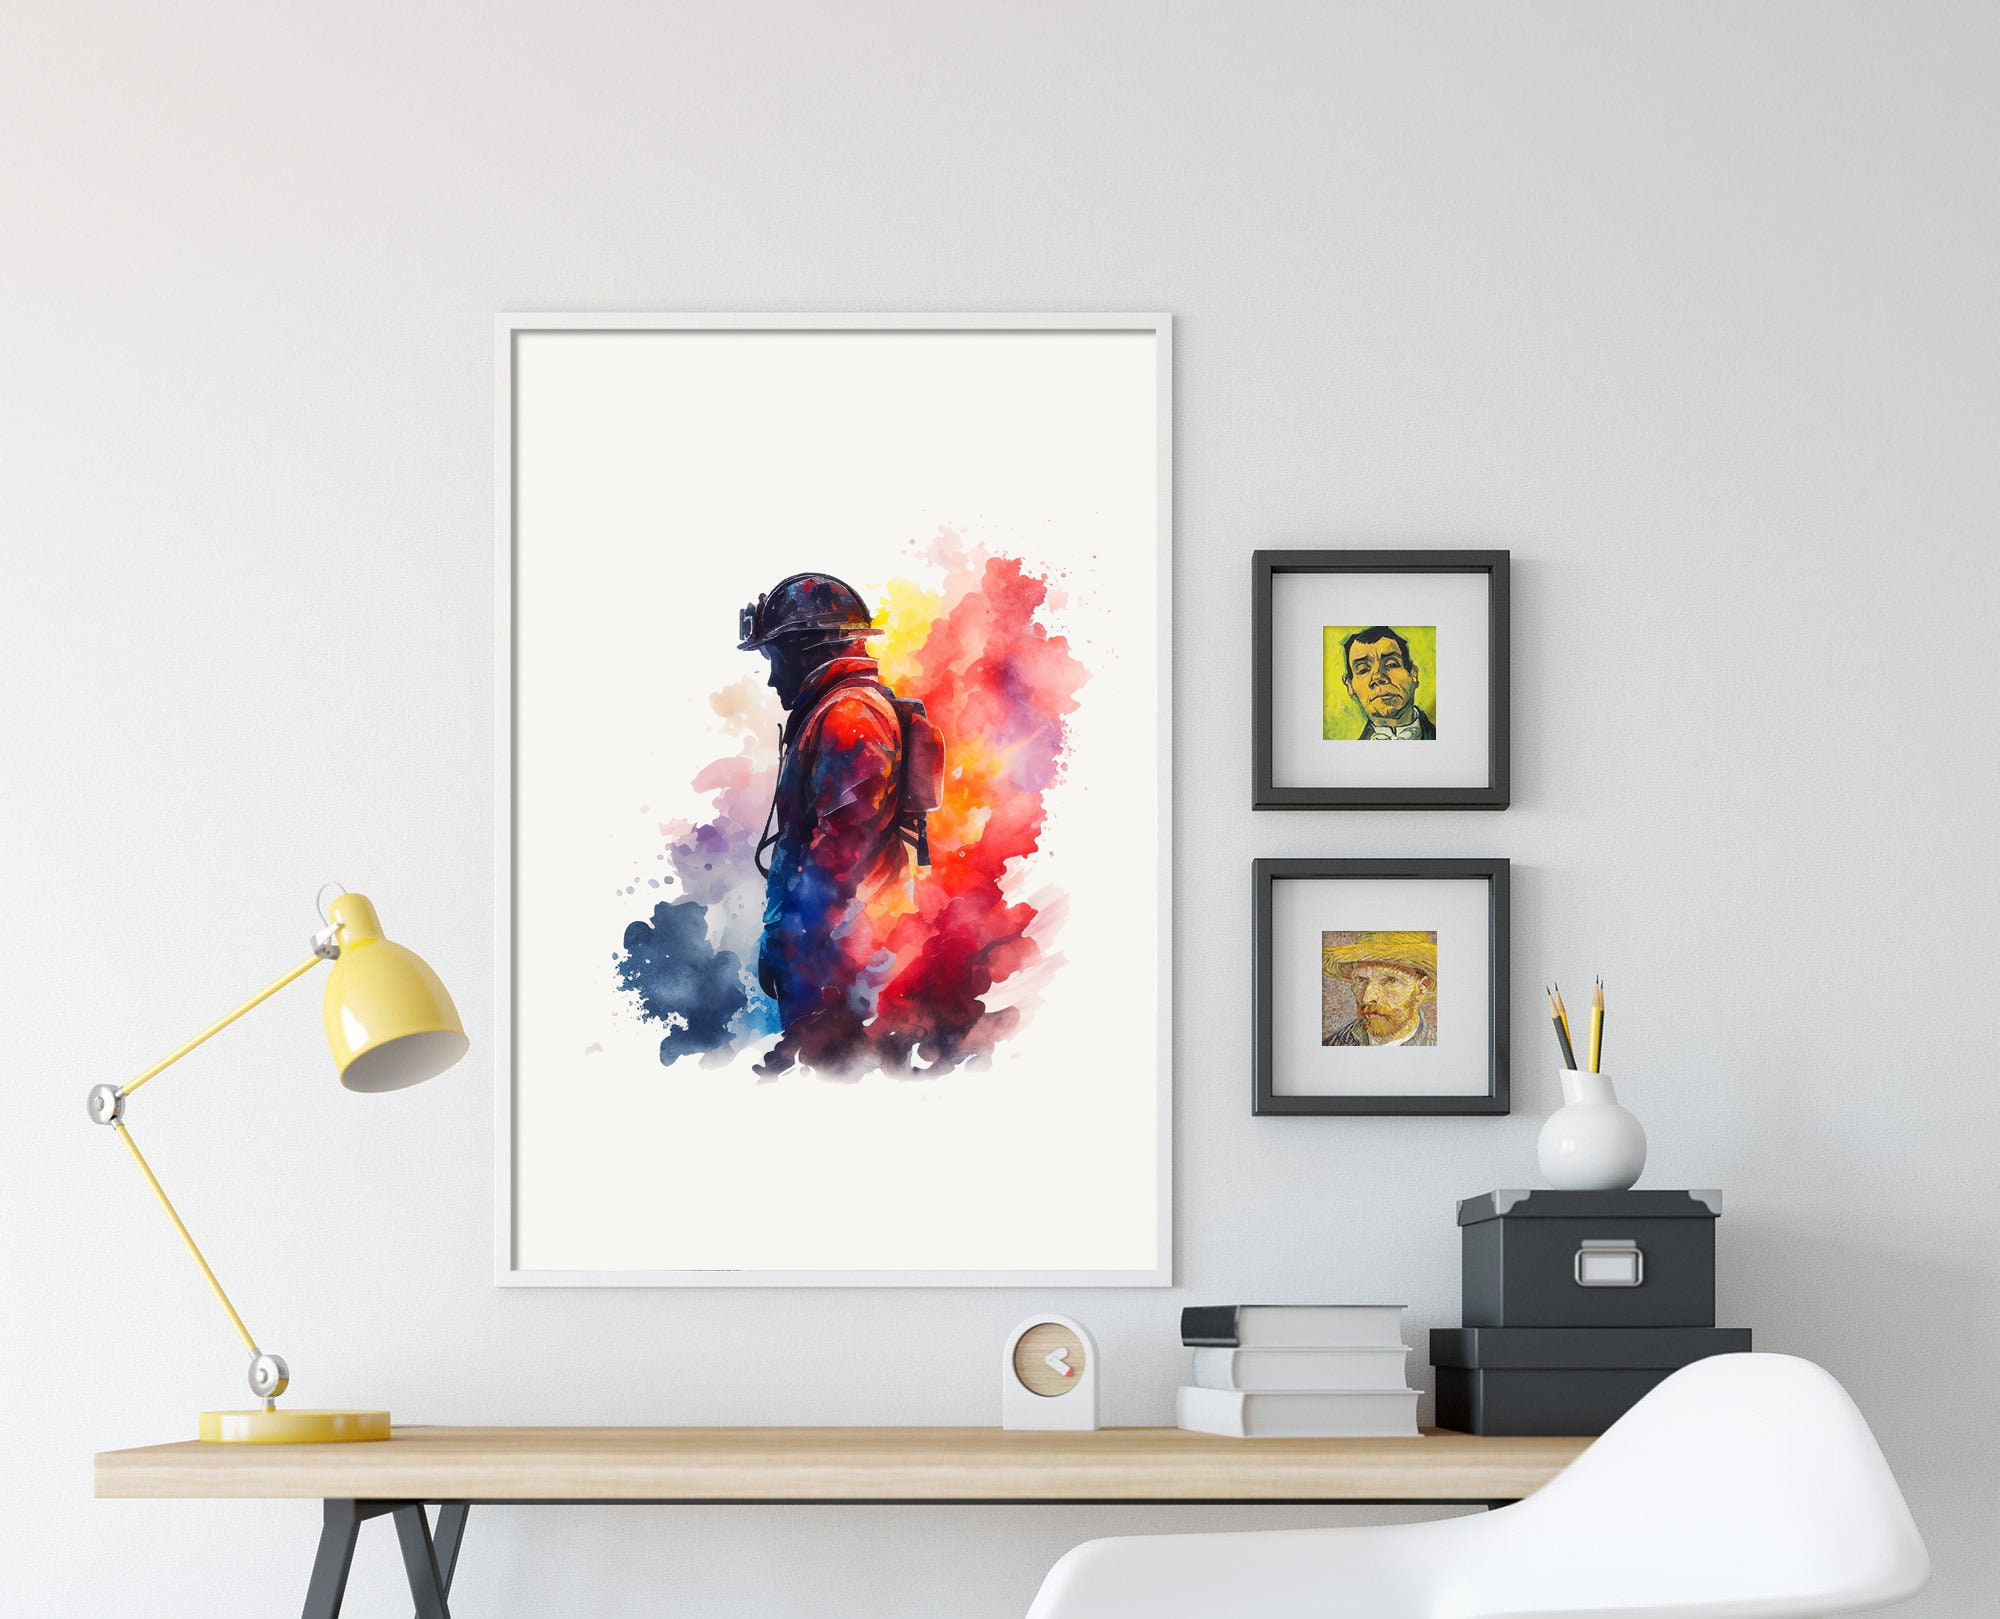 Discover Firefighter Watercolour - Art Print Poster - Colourful Paint Splashes - Gift Home Wall Dcor Giclee - Fire Fighter Fireman First Responder